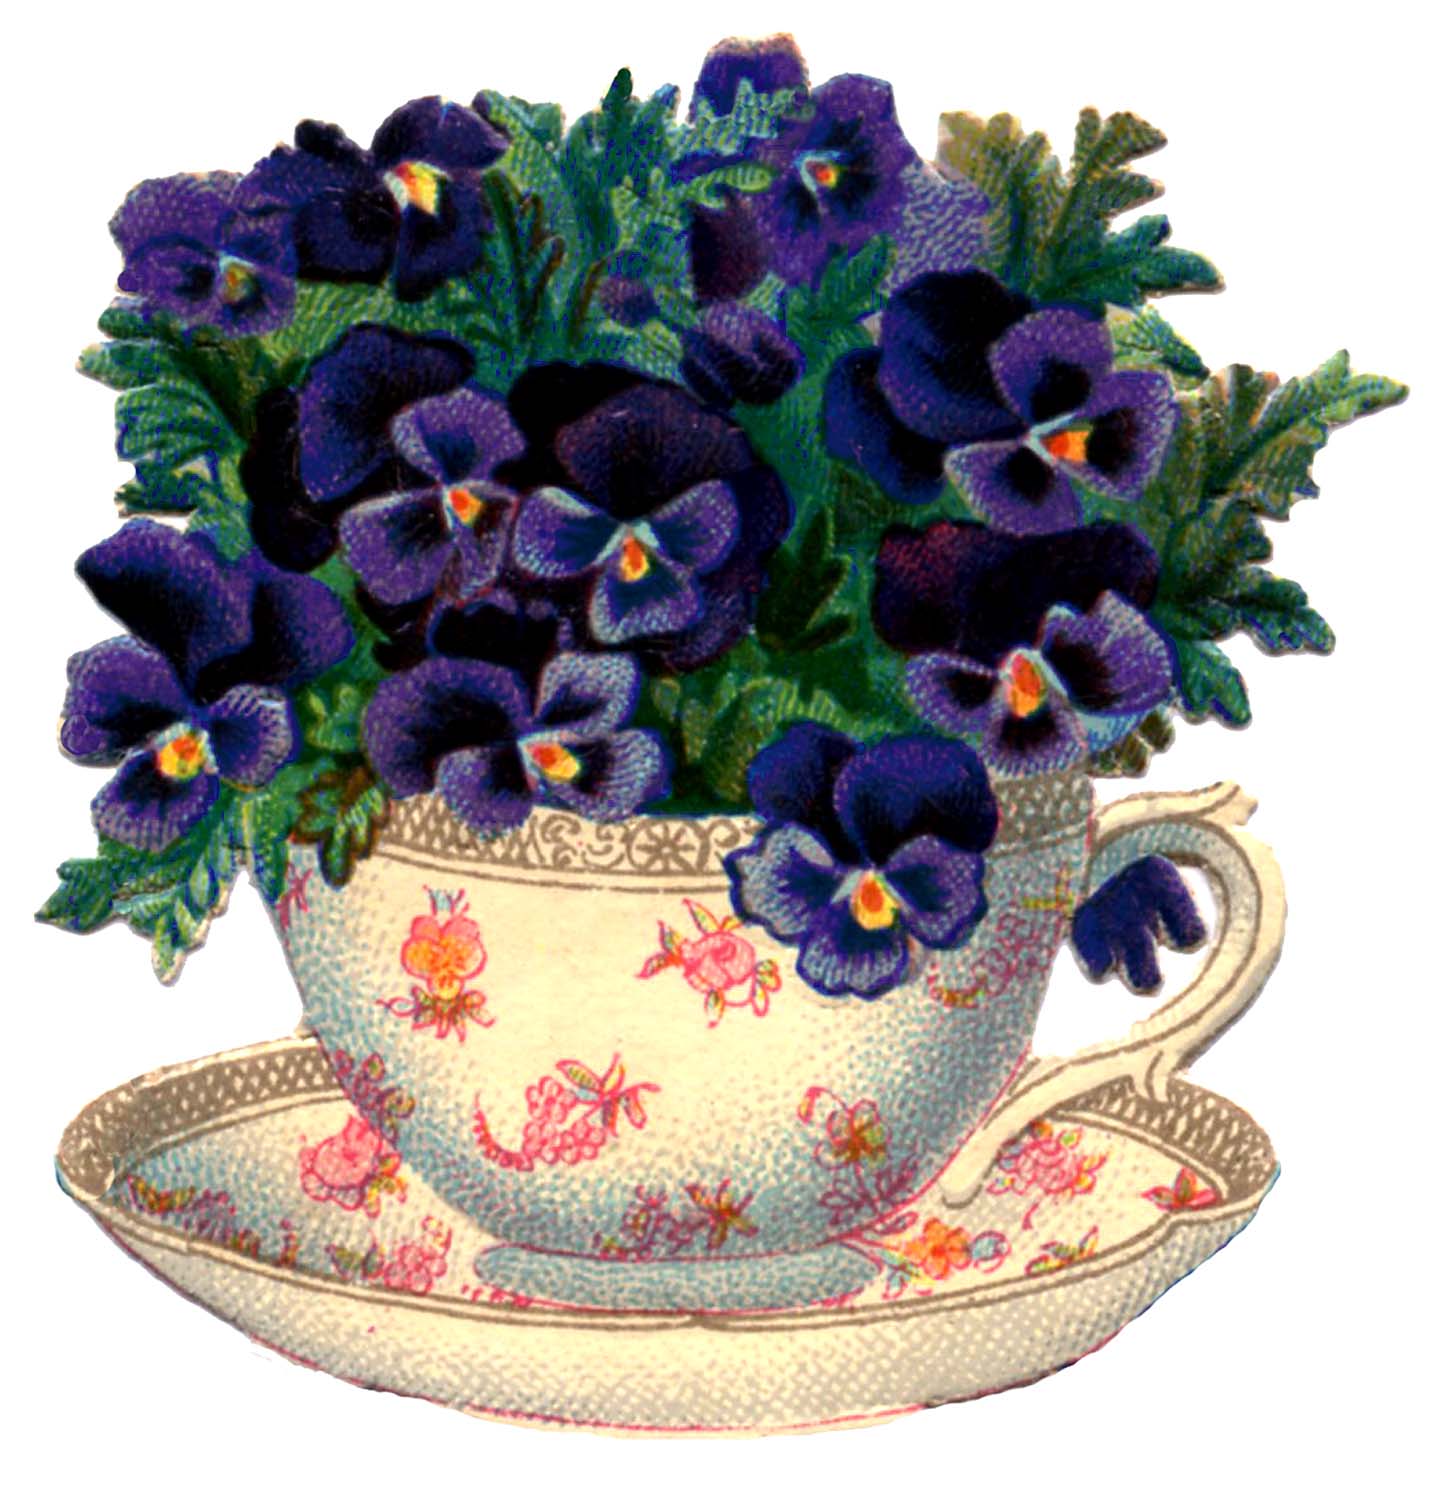 Vintage Graphic   Beautiful Teacup With Pansies   The Graphics Fairy